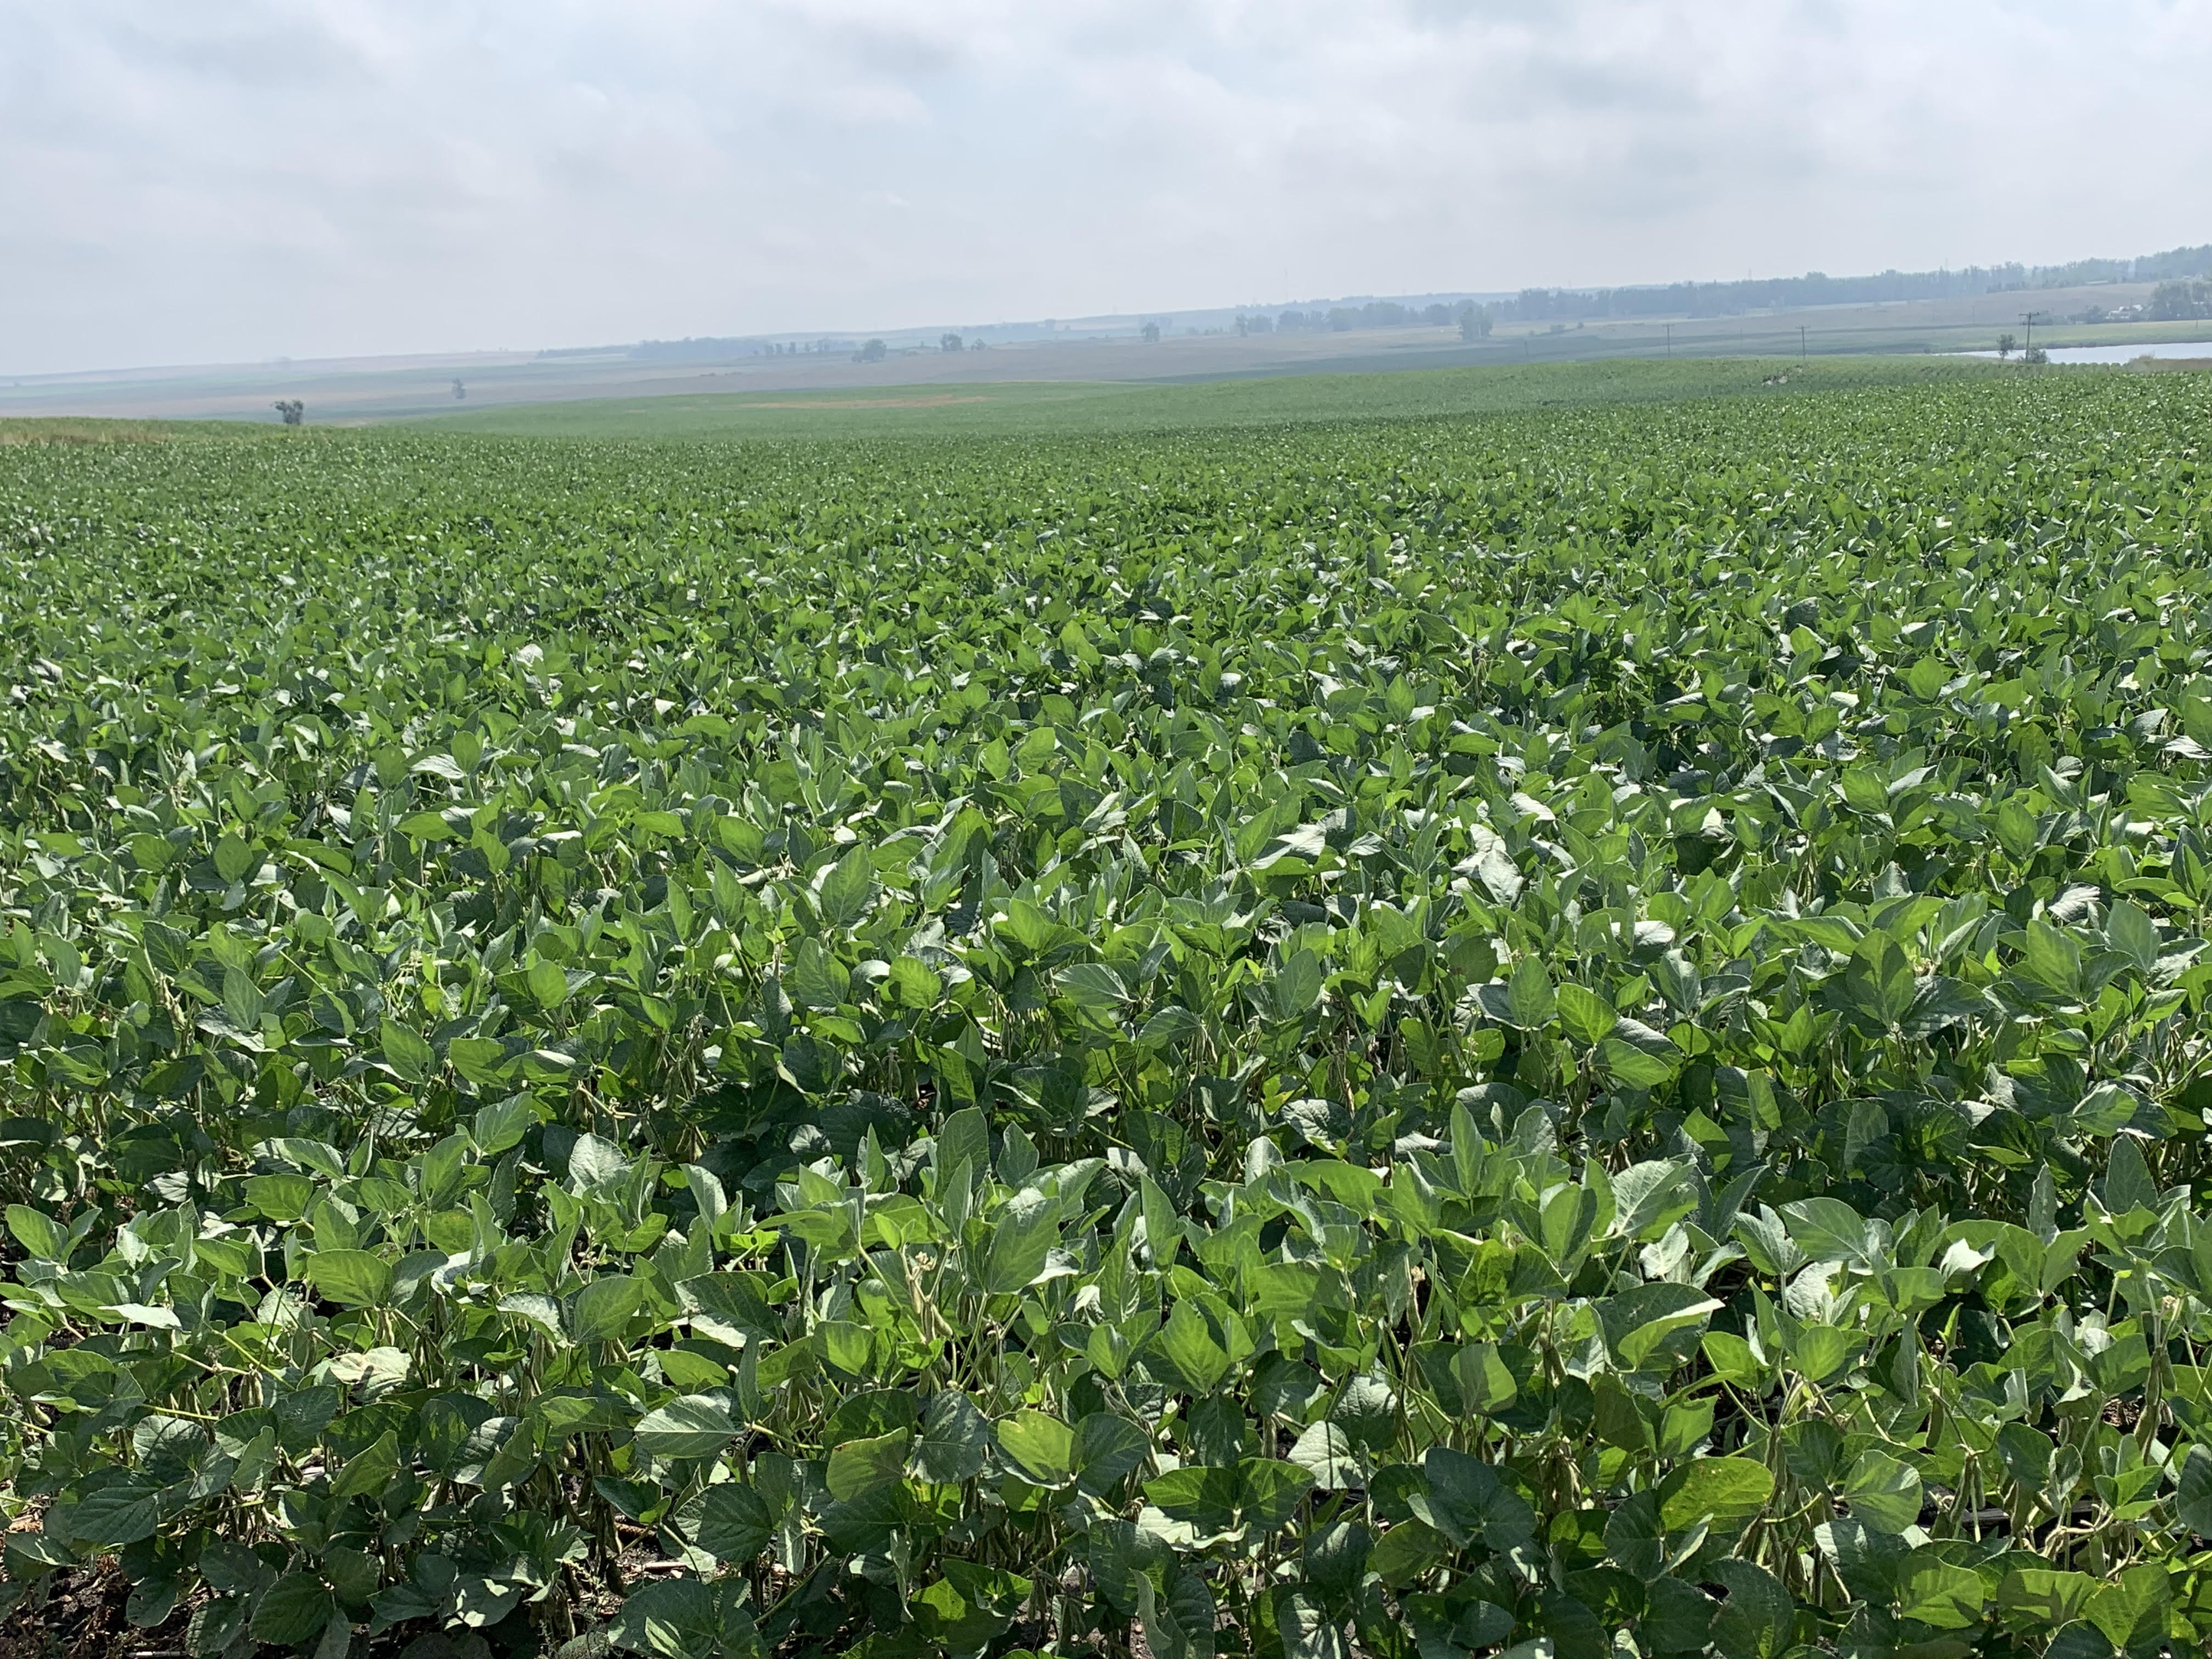 Morning Ag News, April 13, 2022: Global crop acres are up compared to acres in 2020